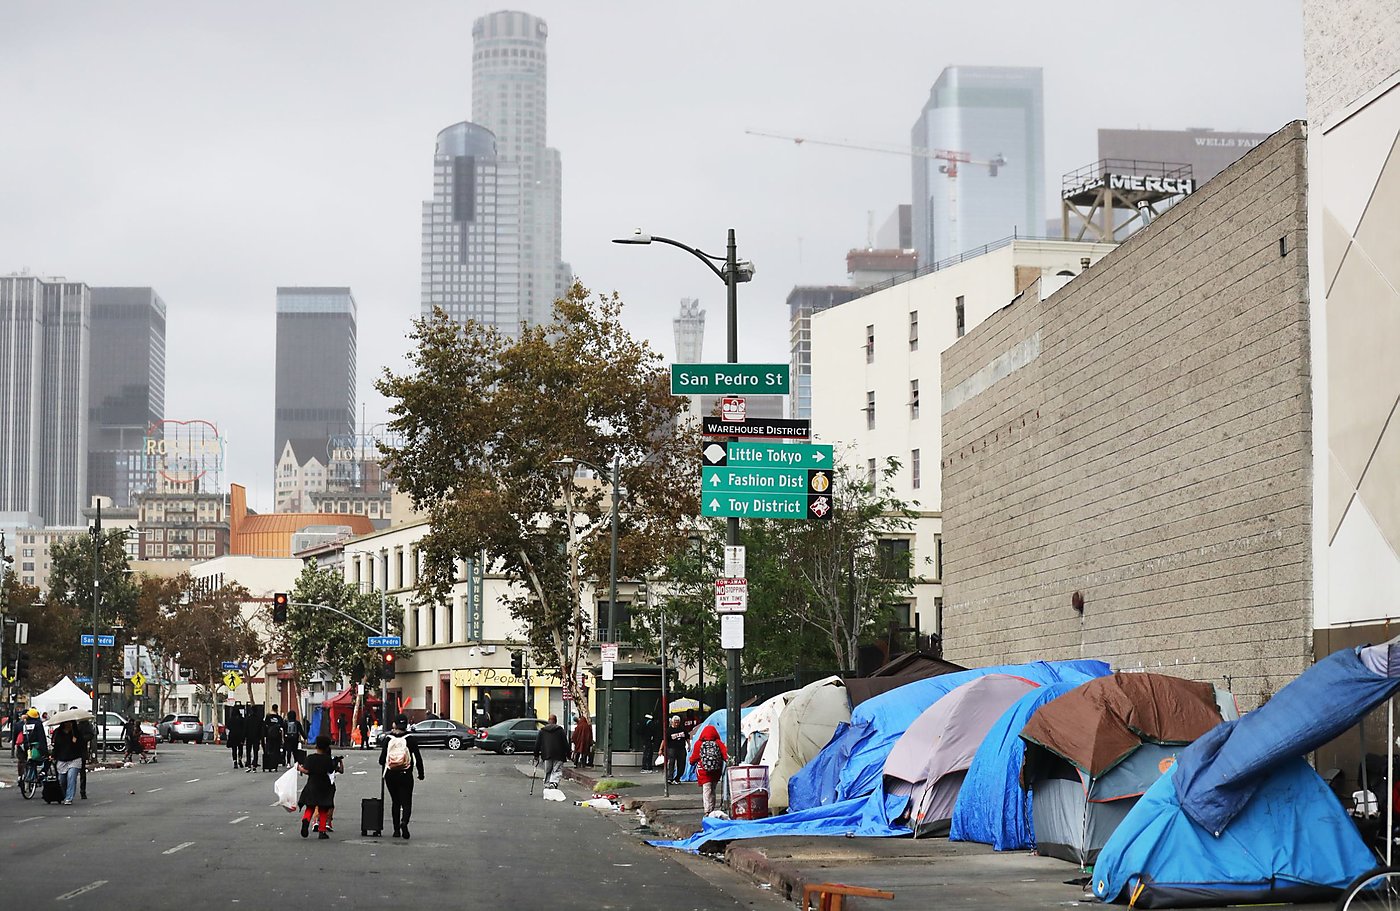 Tent city on skid row in California